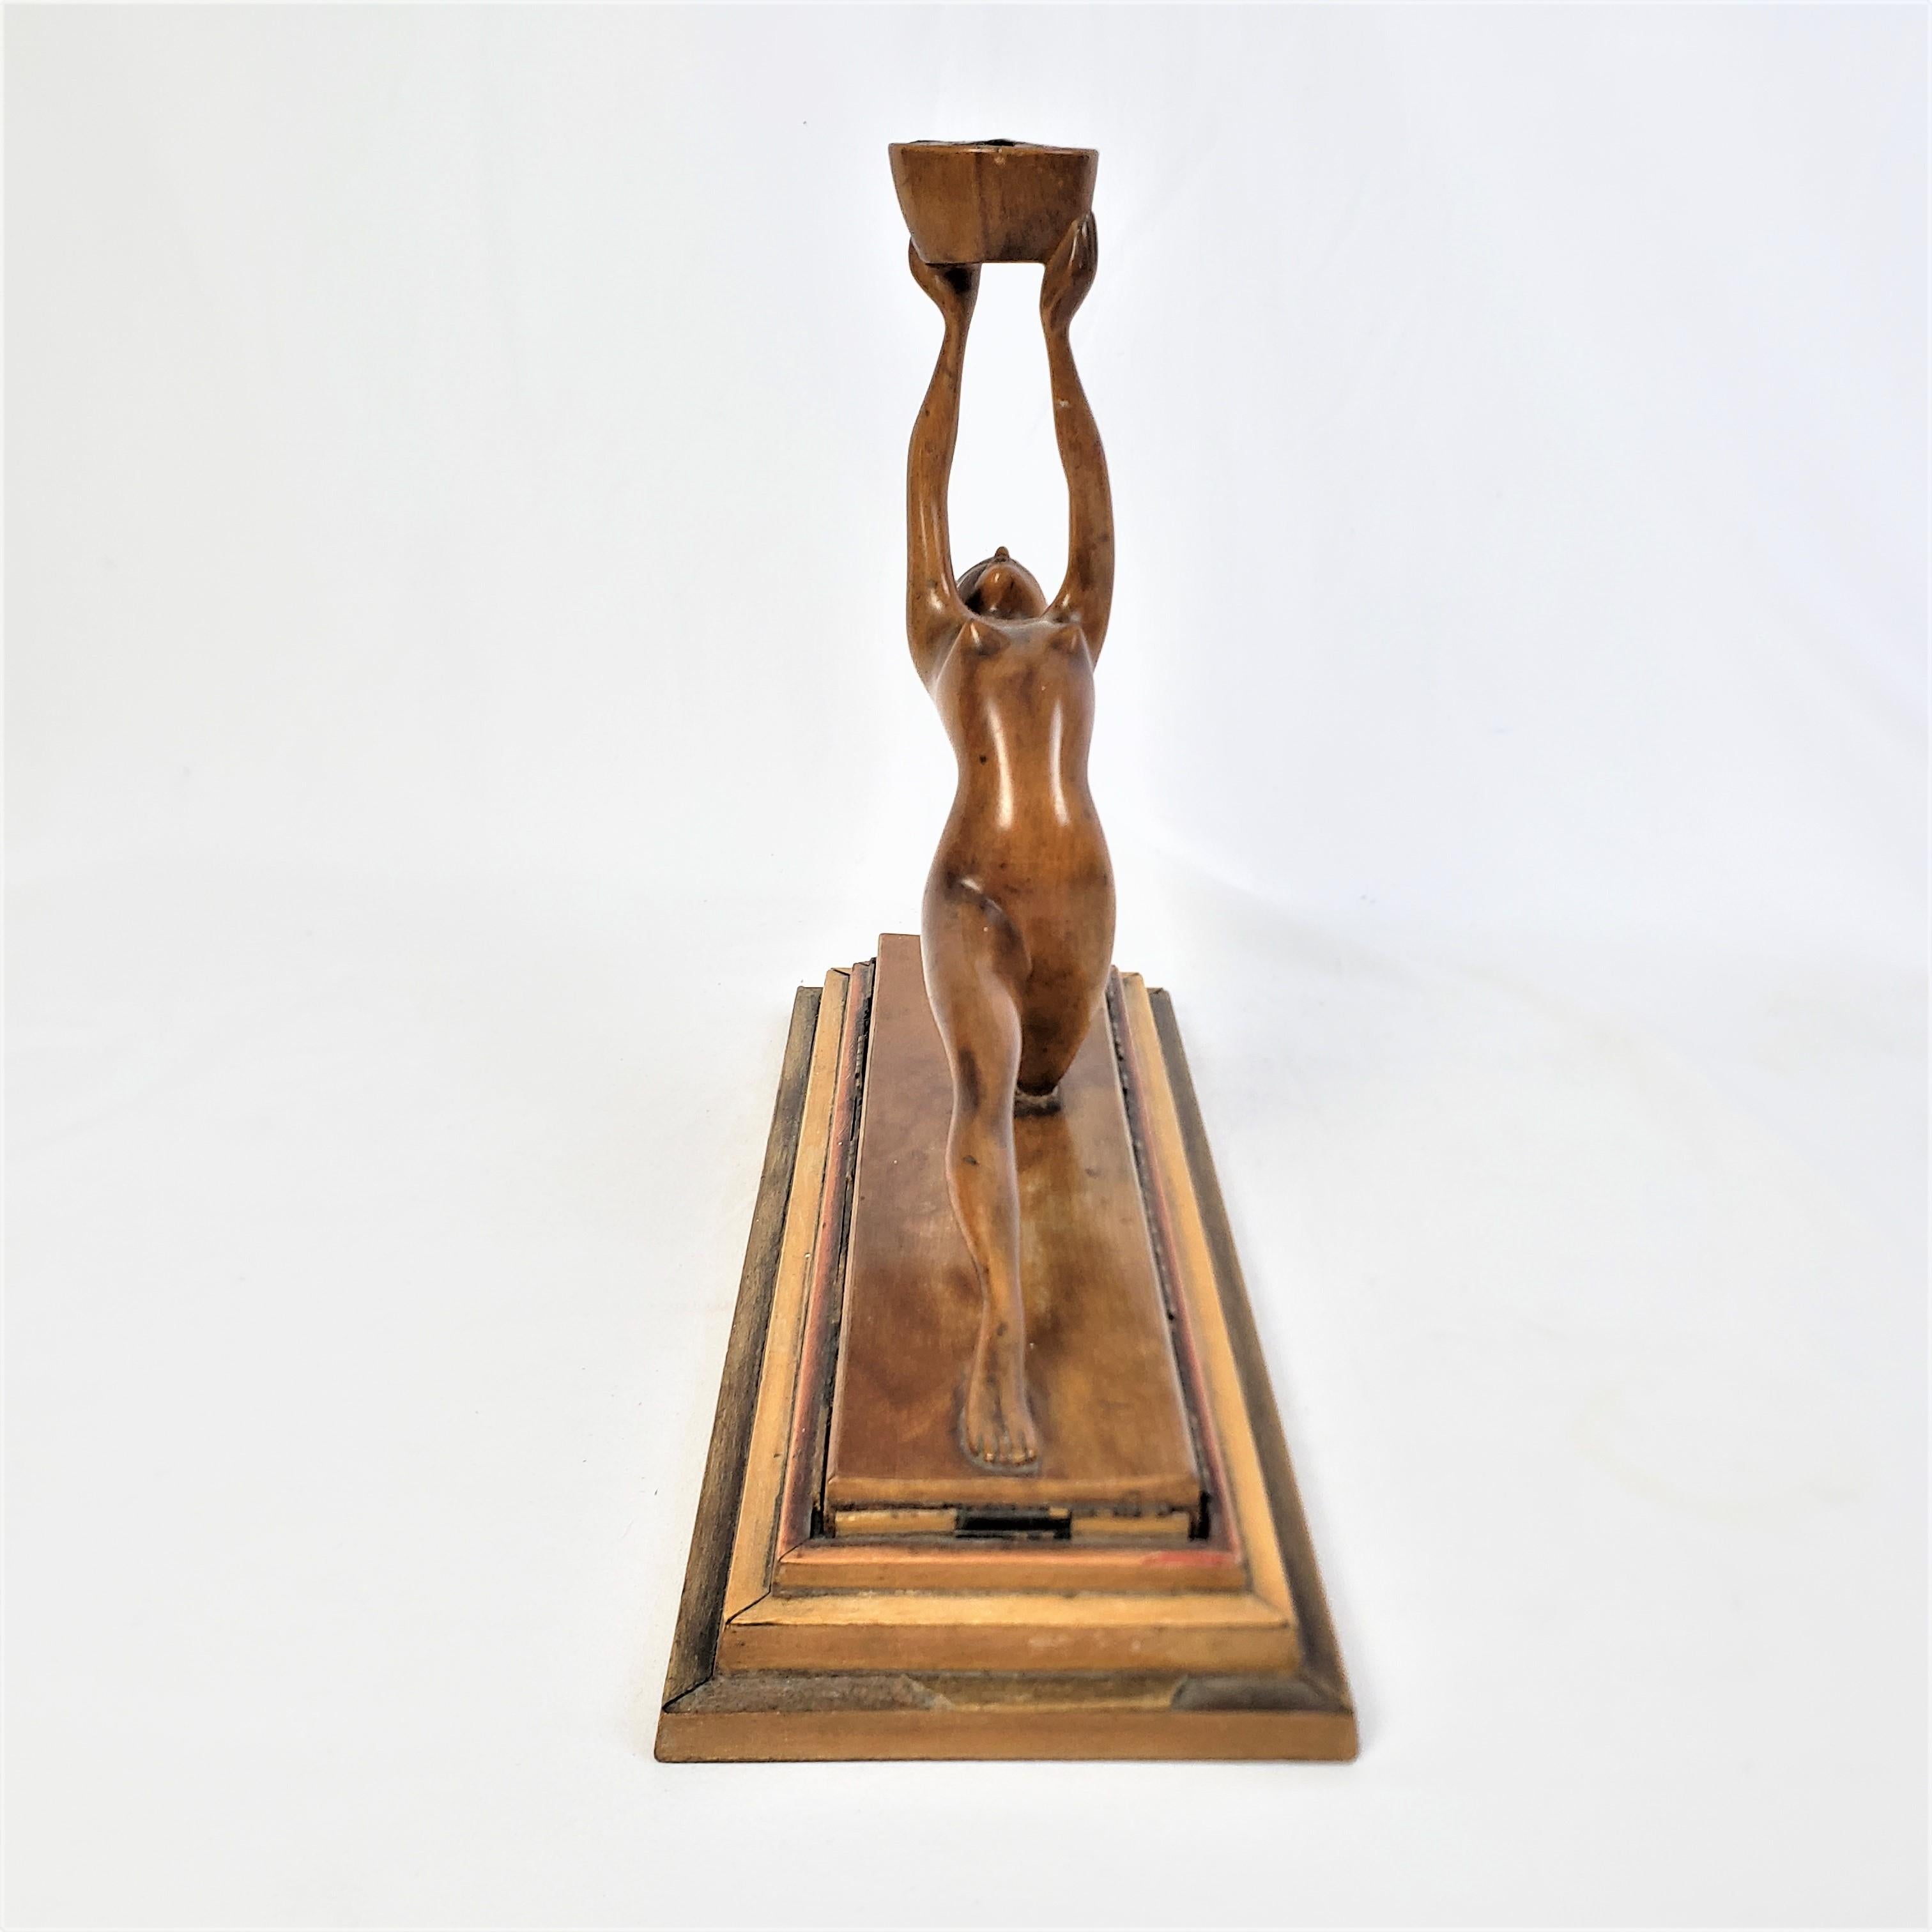 Antique Art Deco Hand-Carved Wooden Sculpture of a Nude Female Holding a Basket For Sale 3